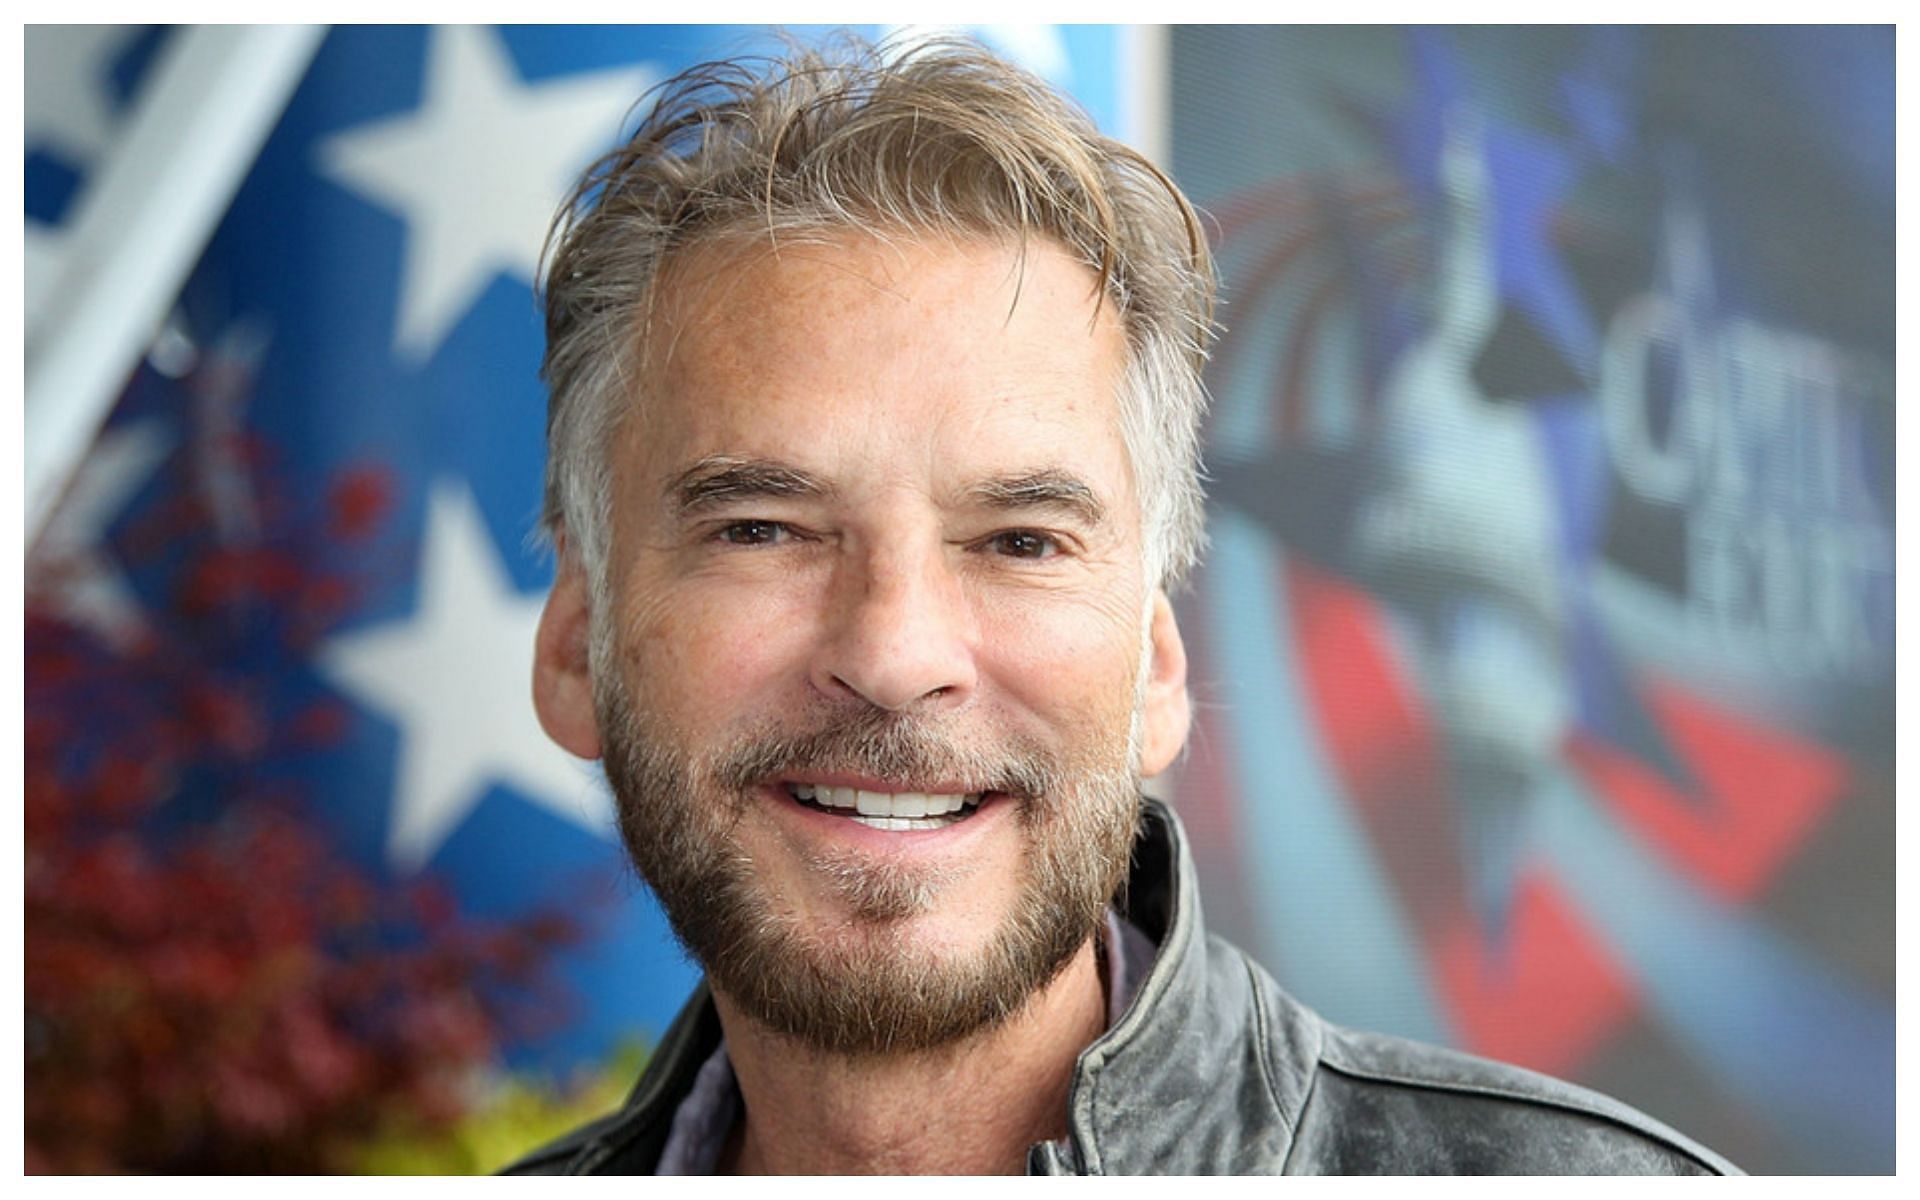 Classic rocker Kenny Loggins hosts his own show (Image via The Hollywood Reporter)